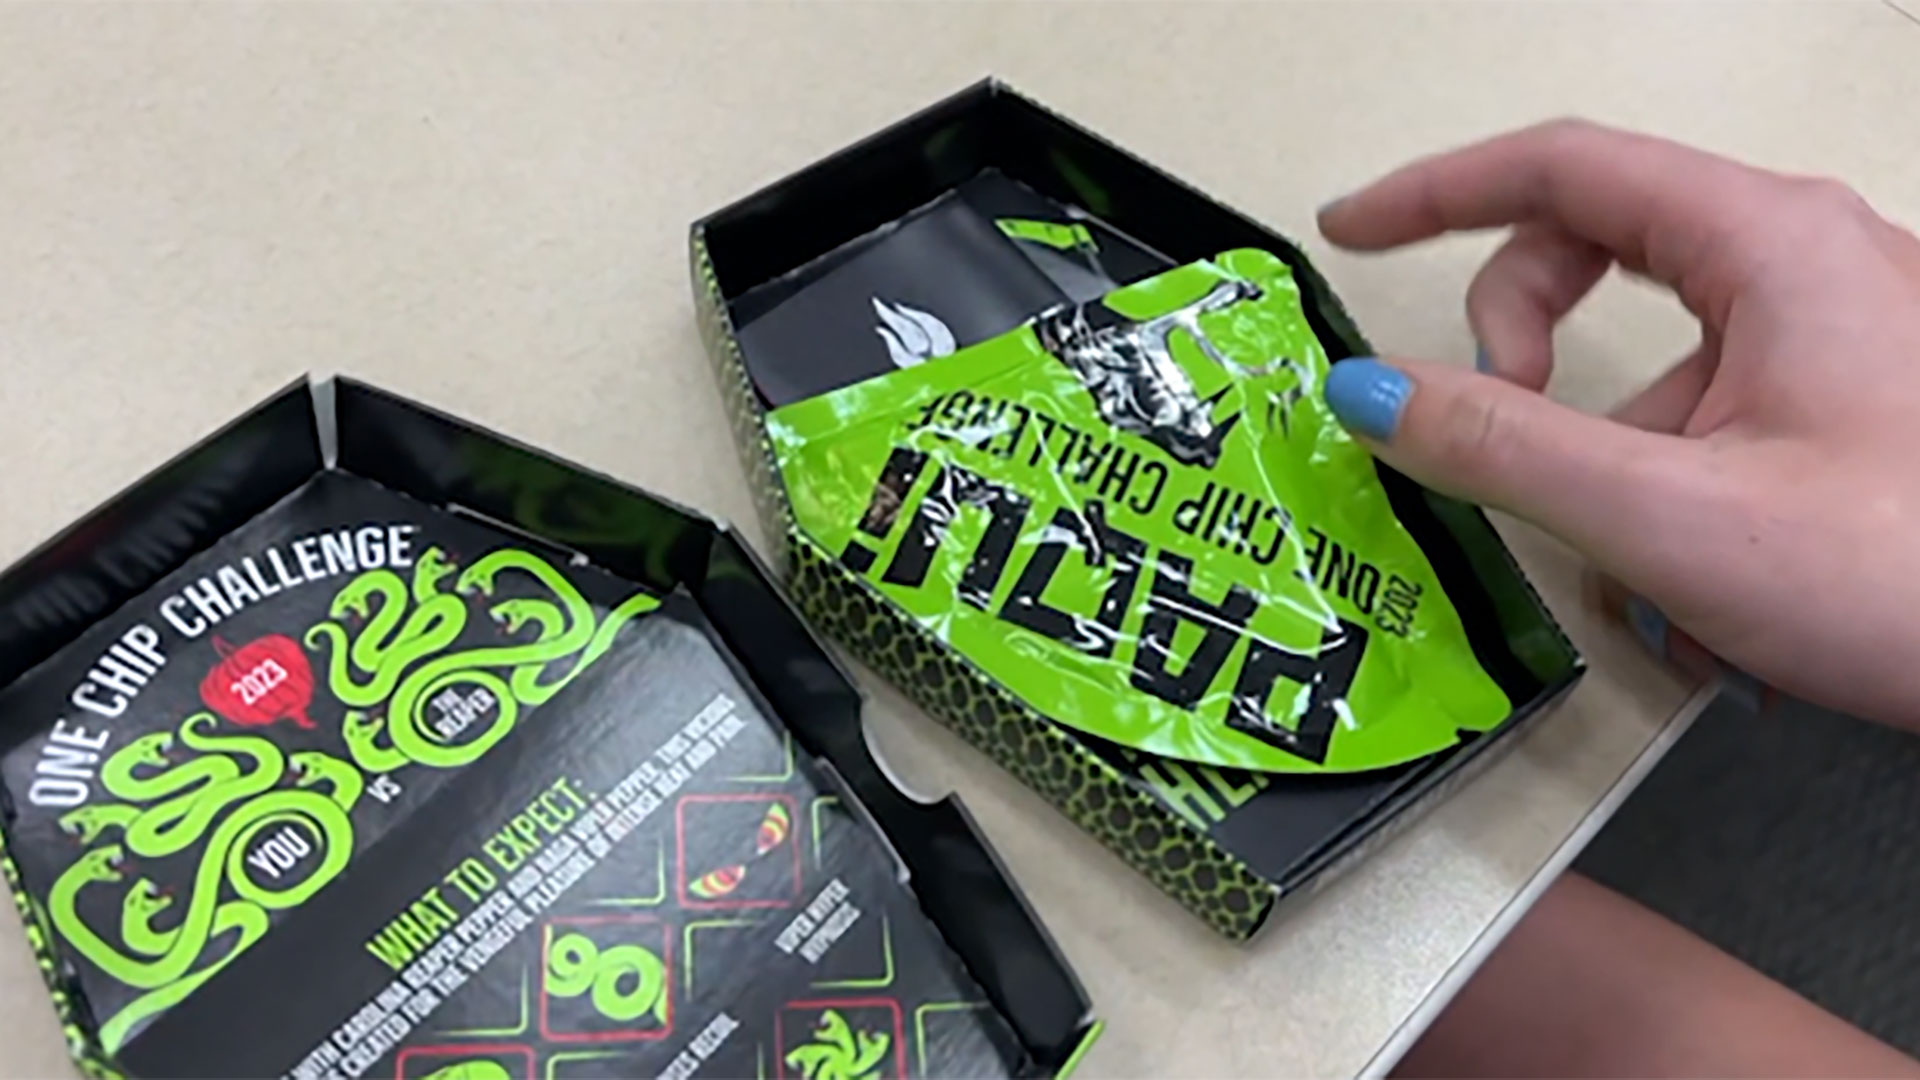 One Chip Challenge' maker removing product from shelves after death of  Massachusetts teen